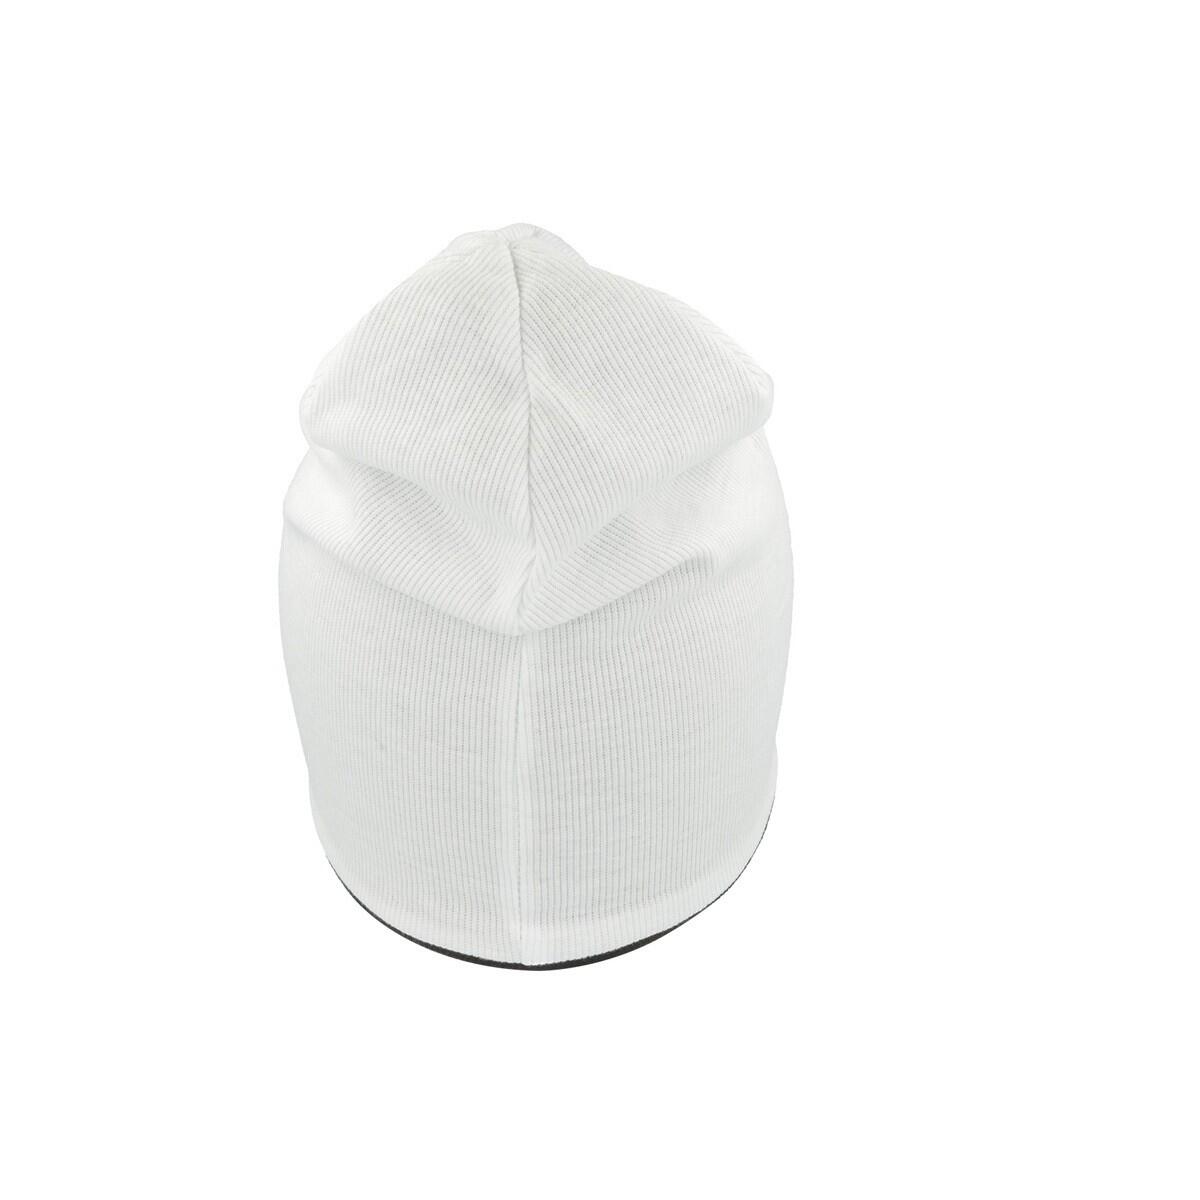 Extreme Reversible Jersey Slouch Beanie (White/Black) 3/4